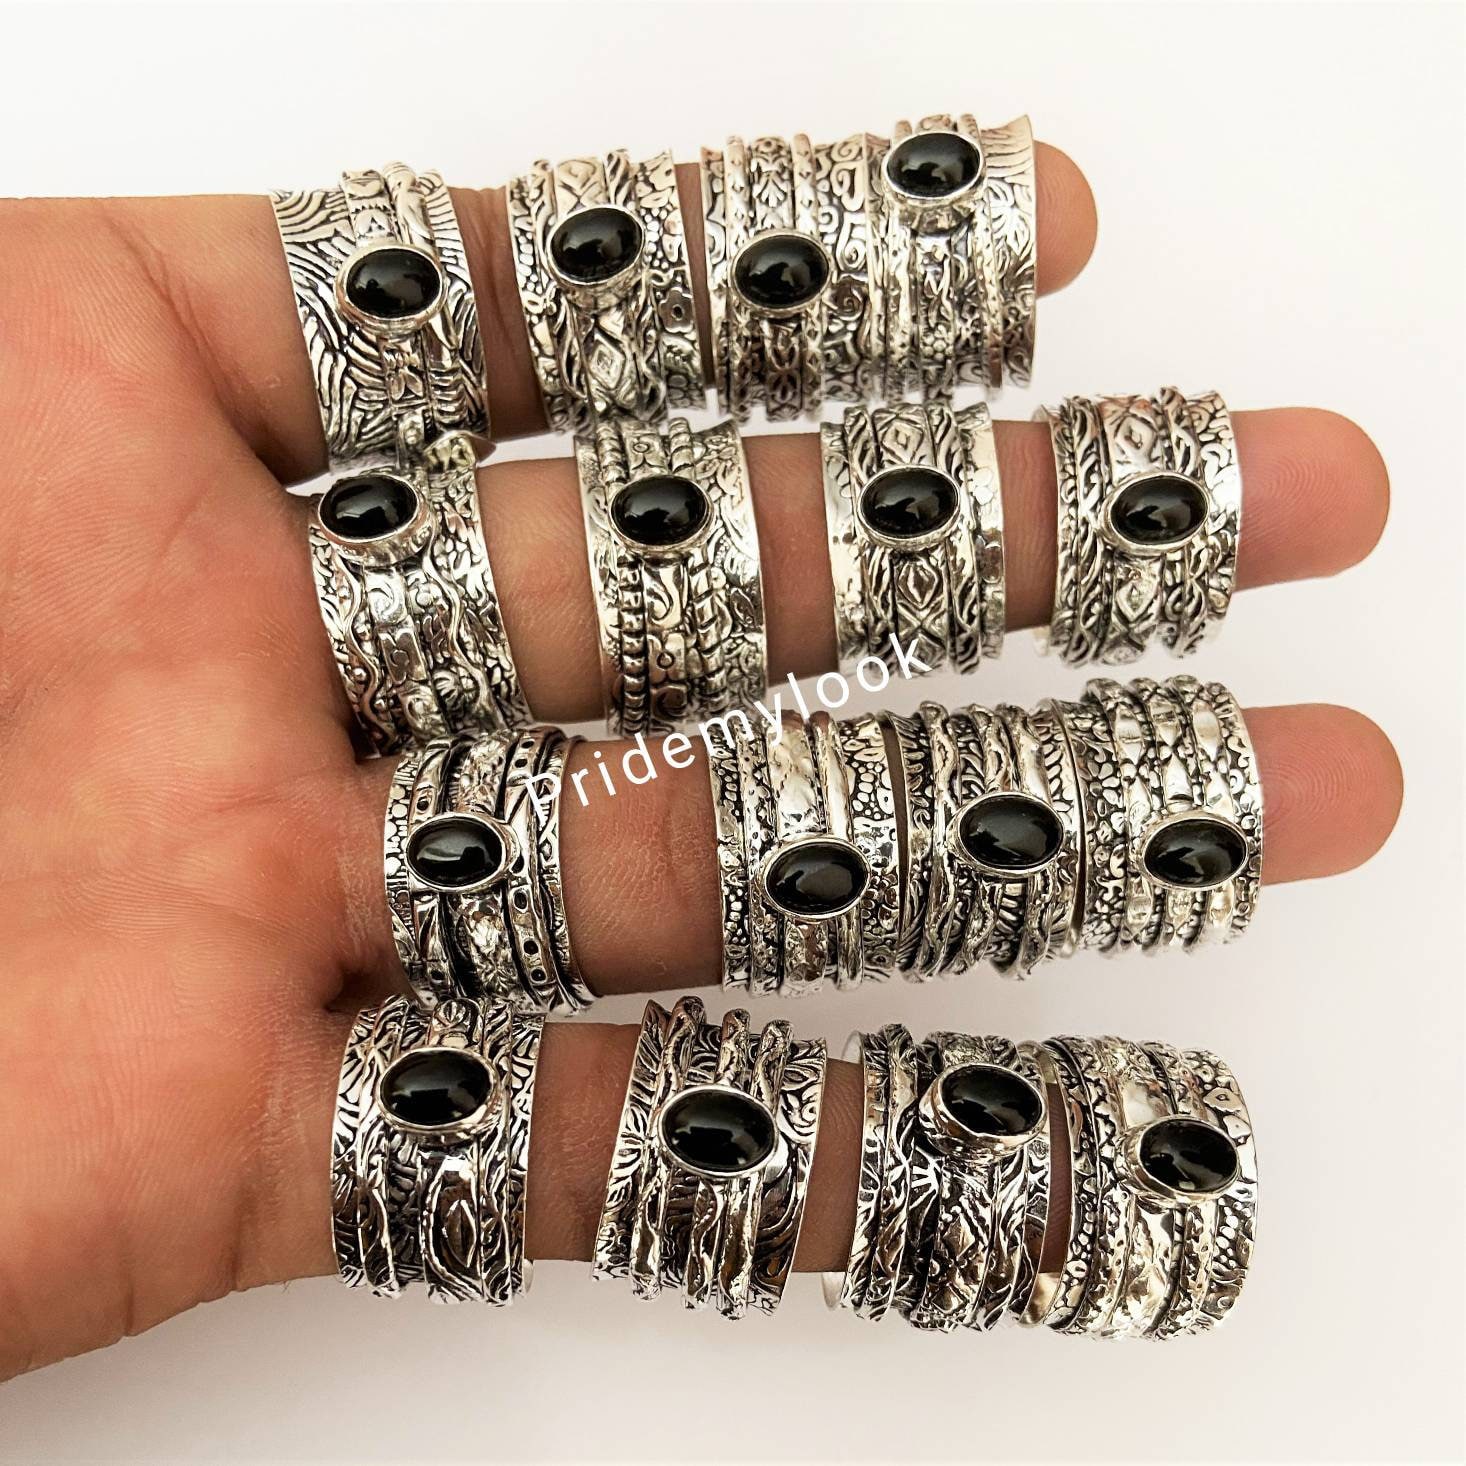 200Pcs Charms for Jewelry Making, Assorted Jewelry Bangle Charms, Wholesale  Mixed Bulk Metal Charms - Beading & Jewelry Making Kits - Los Angeles,  California, Facebook Marketplace